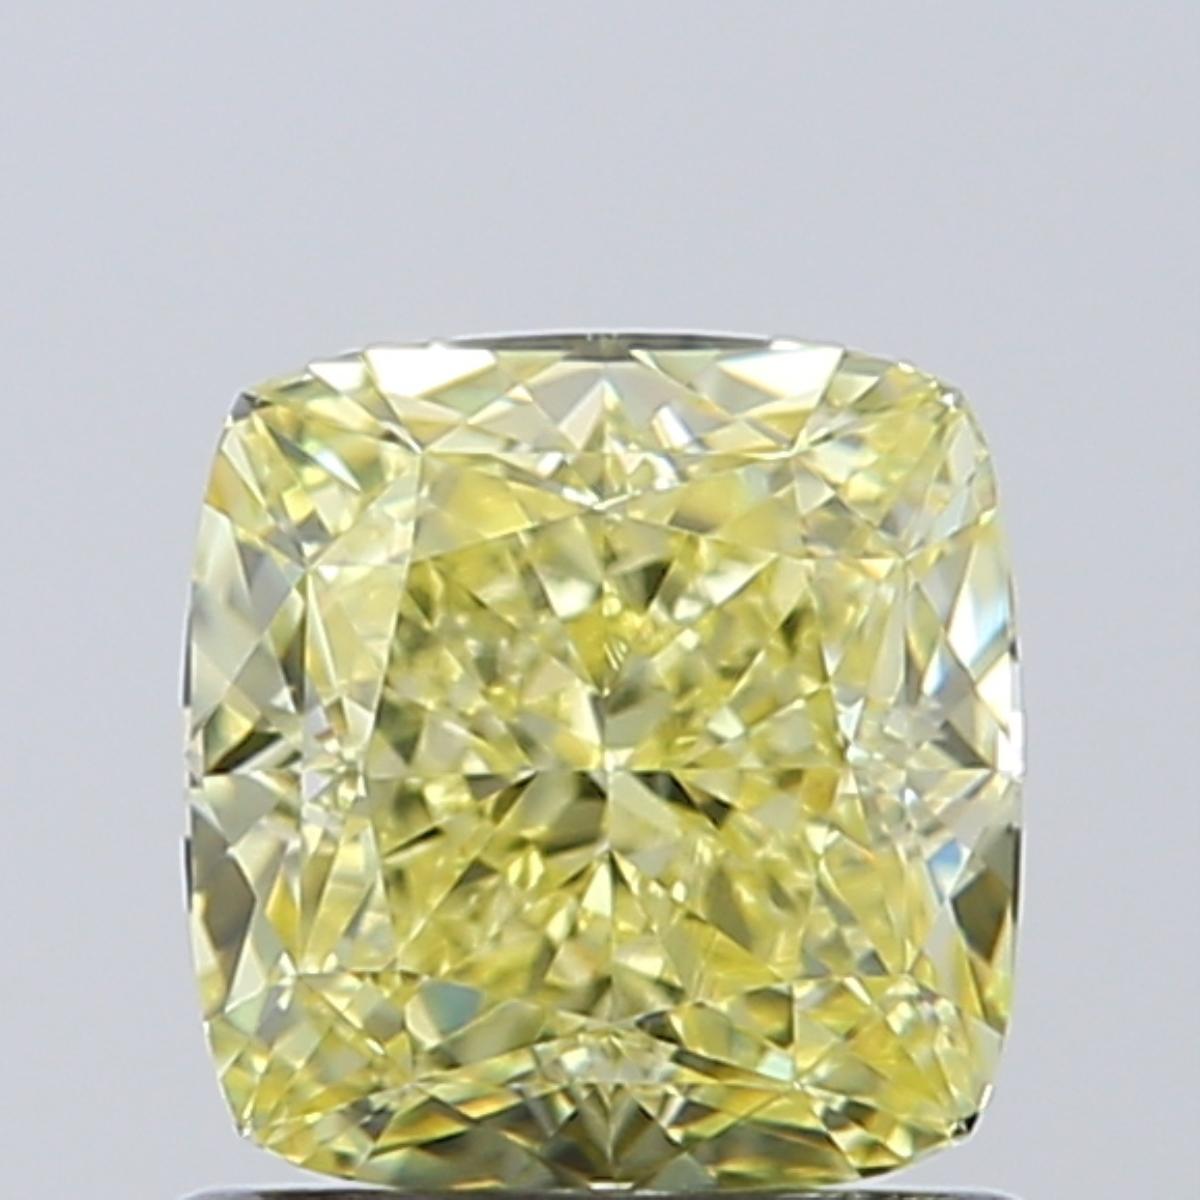 GIA Certified 1.00-1.05 Carat VVS1, Fancy Yellow, Cushion Cut, Natural Diamond

Perfect Yellow Color Diamonds for perfect gifts.

5 C's:
Certificate: GIA
Carat: 1.00-1.05ct
Color: Natural Fancy Yellow
Clarity: VVS1(Very Very Slightly Included)
Cut: